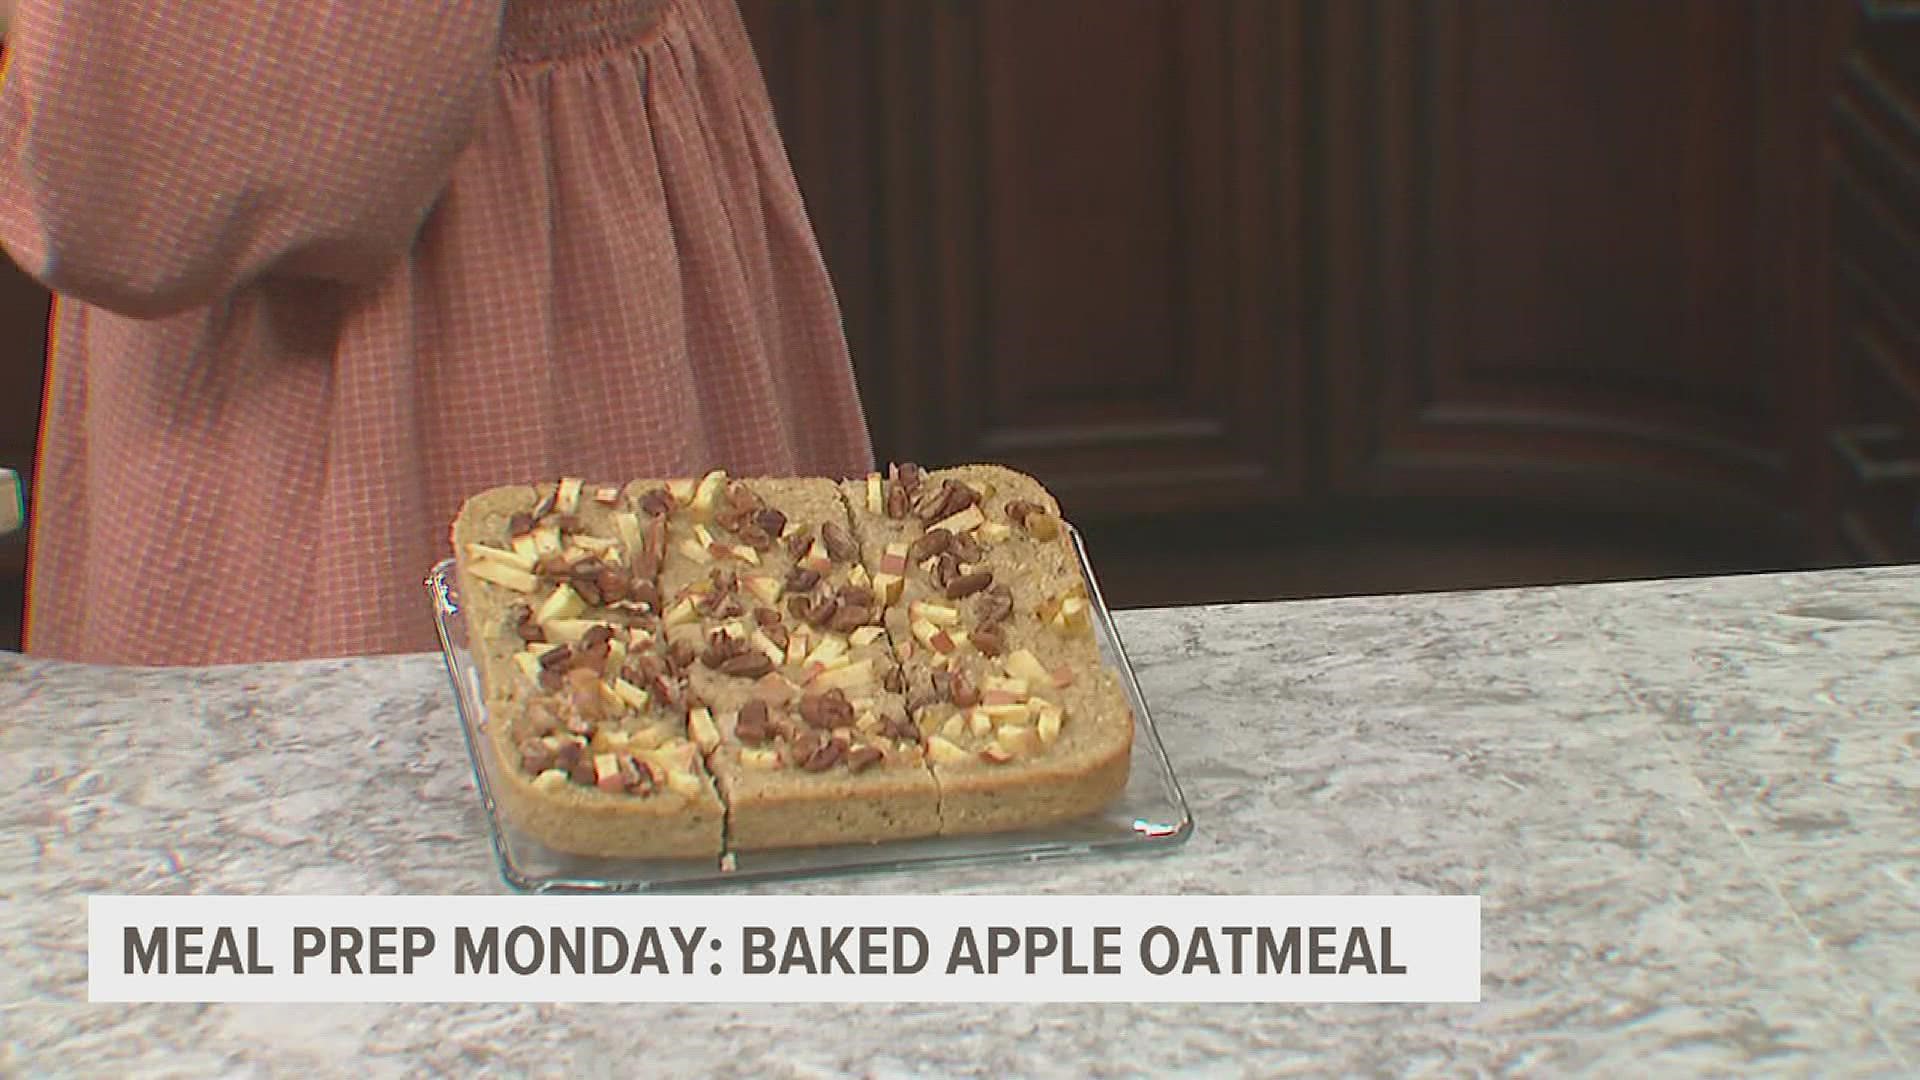 This highly-customizable oatmeal bake is a simple and fun treat that's been making the rounds on TikTok lately. Here's how you put it together.